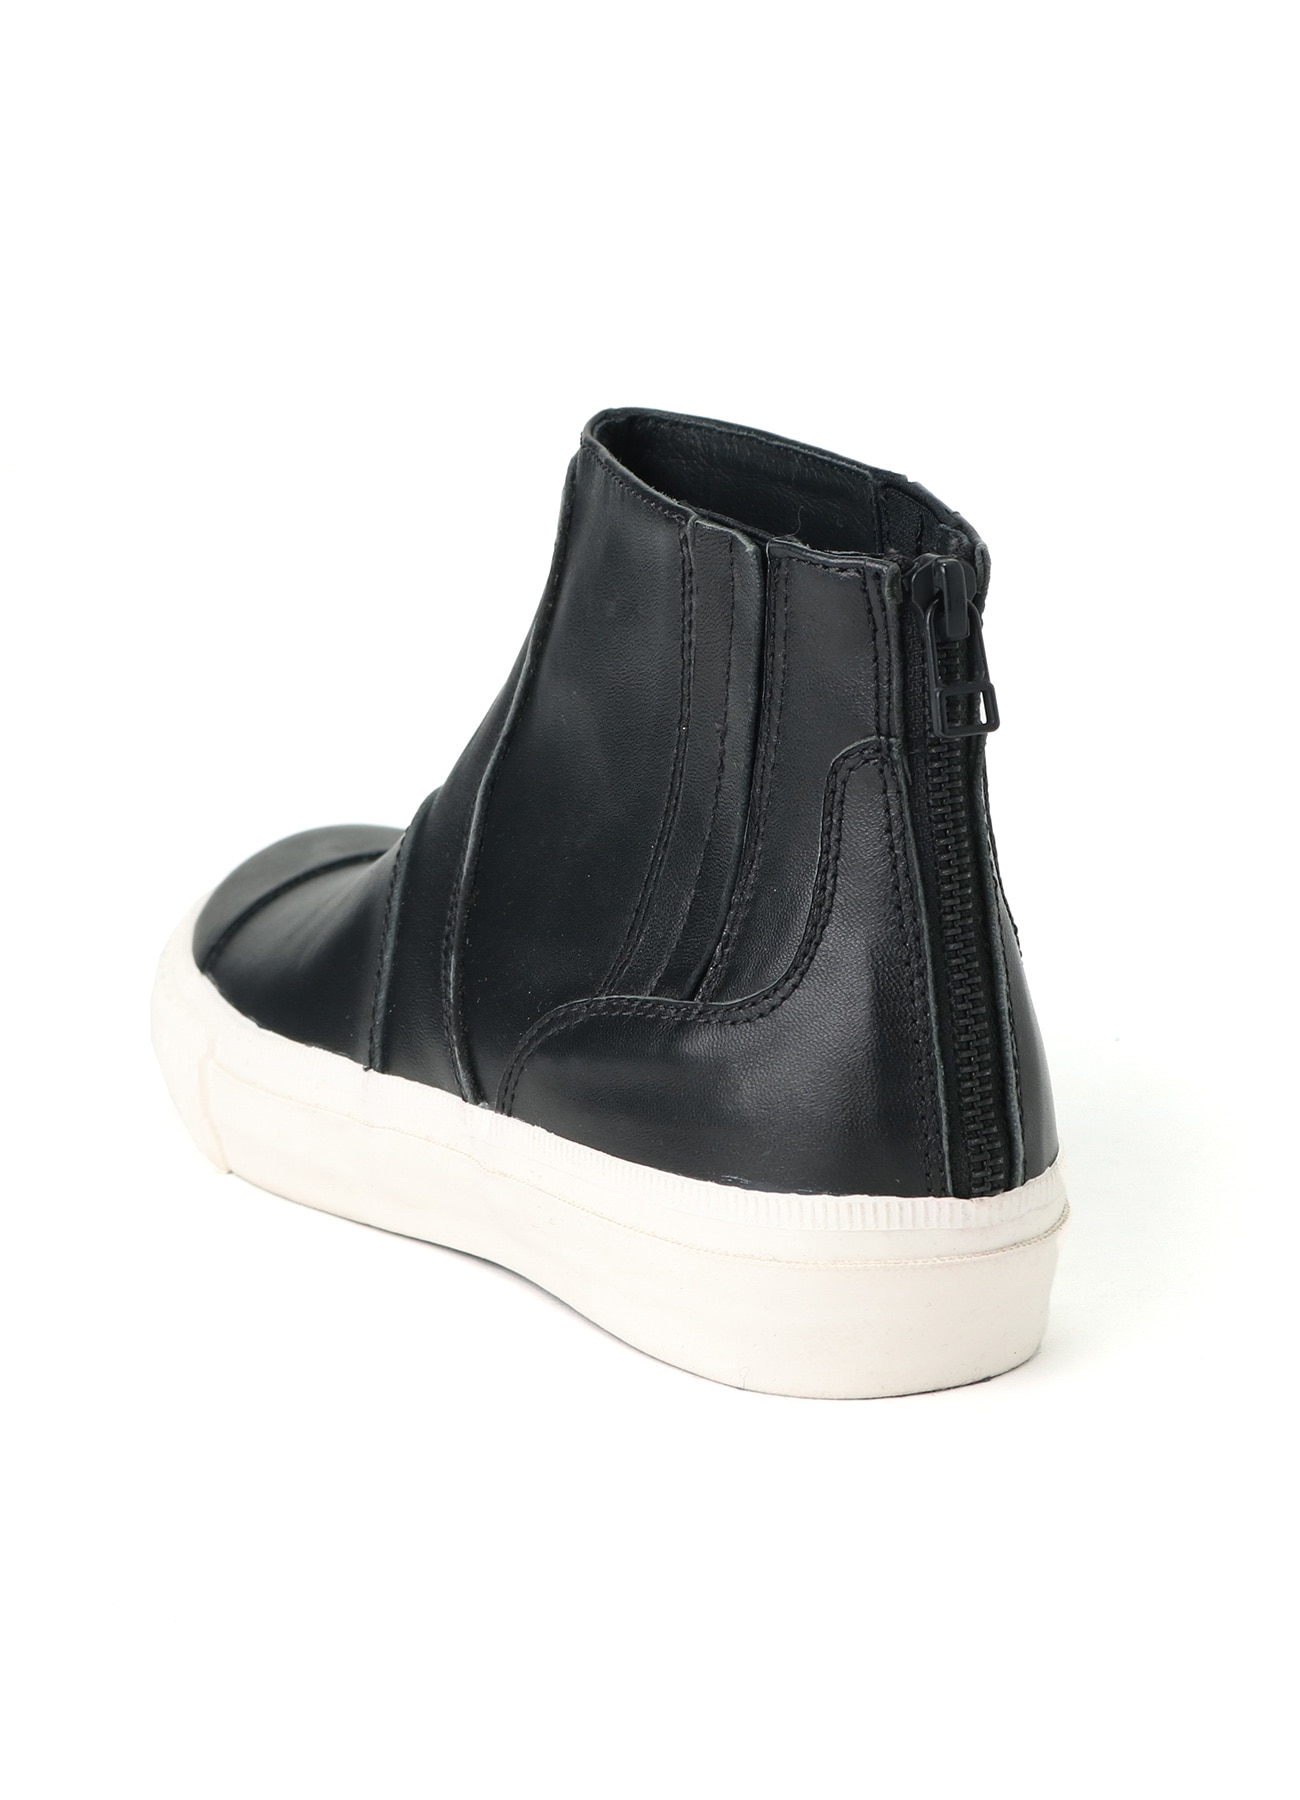 SOFT SMOOTH LEATHER BACK ZIP GORE SNEAKERS(US 8 Black): Vintage